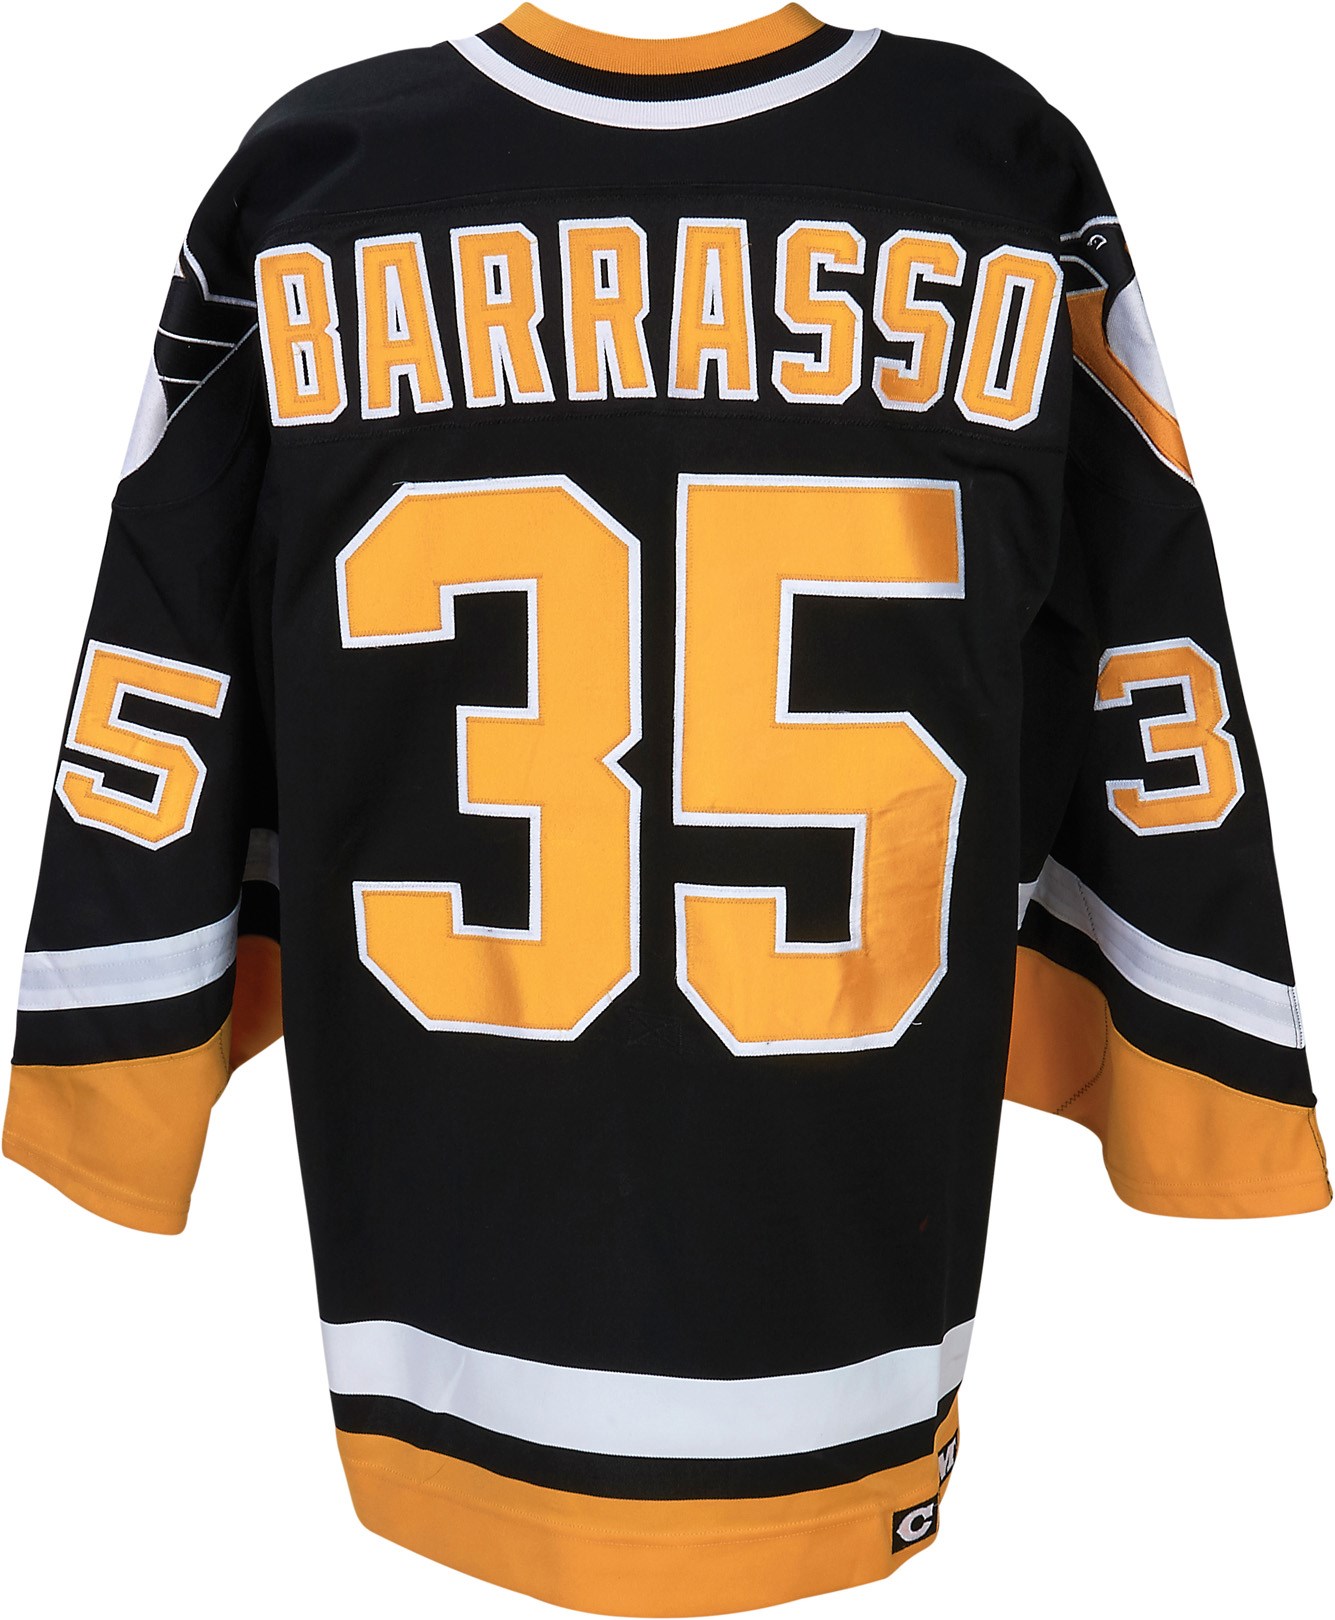 Hockey - 1996-97 Tom Barrasso Pittsburgh Penguins Game Worn Jersey (Photo-Matched)